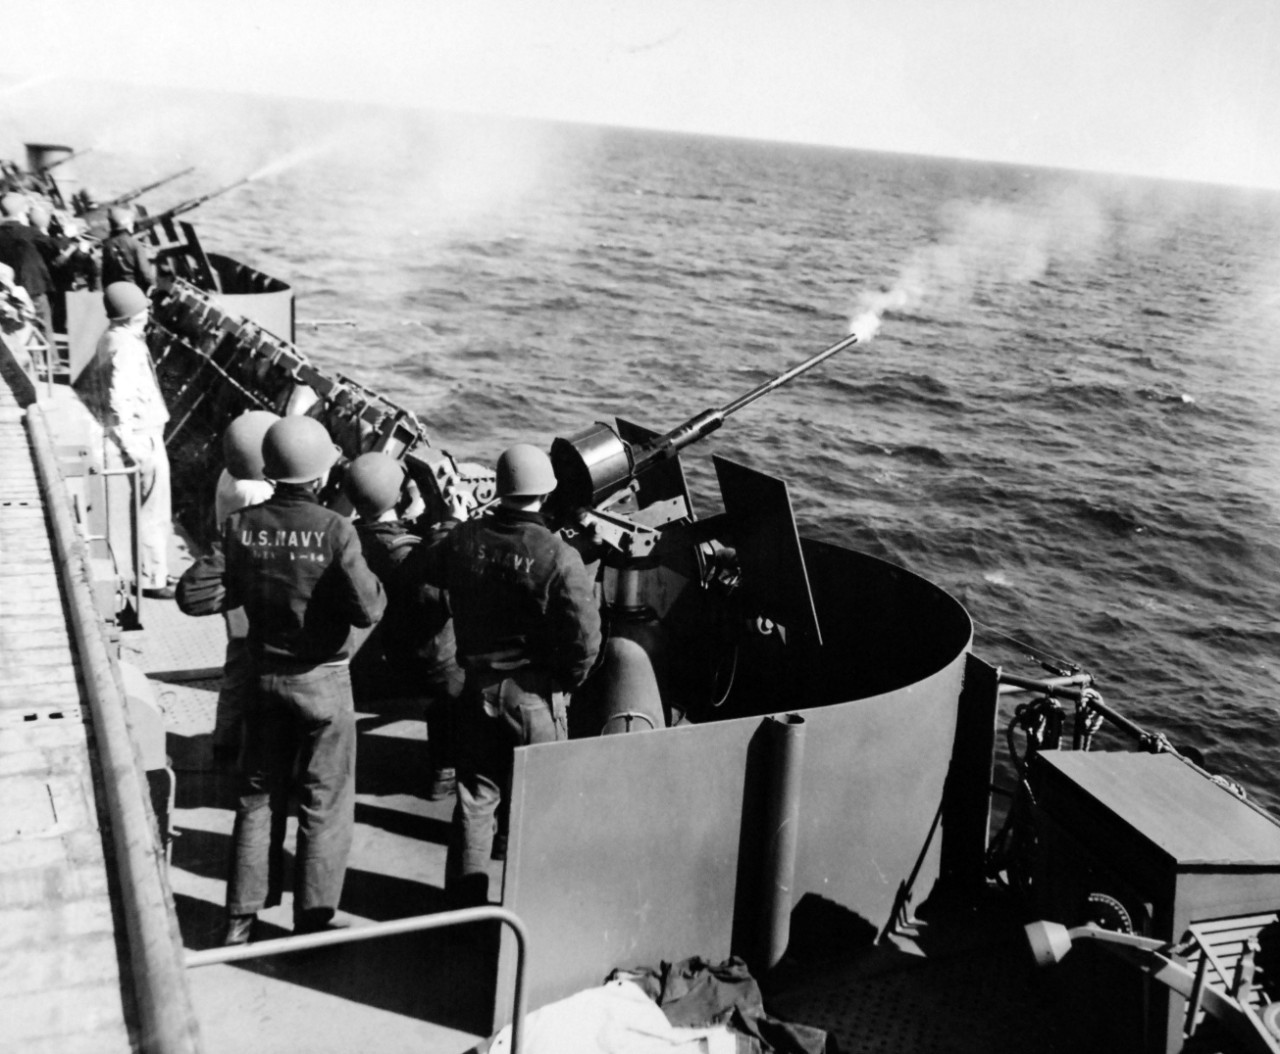 80-G-375578: USS Hoggatt Bay (CVE-75). Shown: 20MM guns firing onboard. Photograph received June 3, 1946. Official U.S. Navy Photograph, now in the collections of the National Archives.